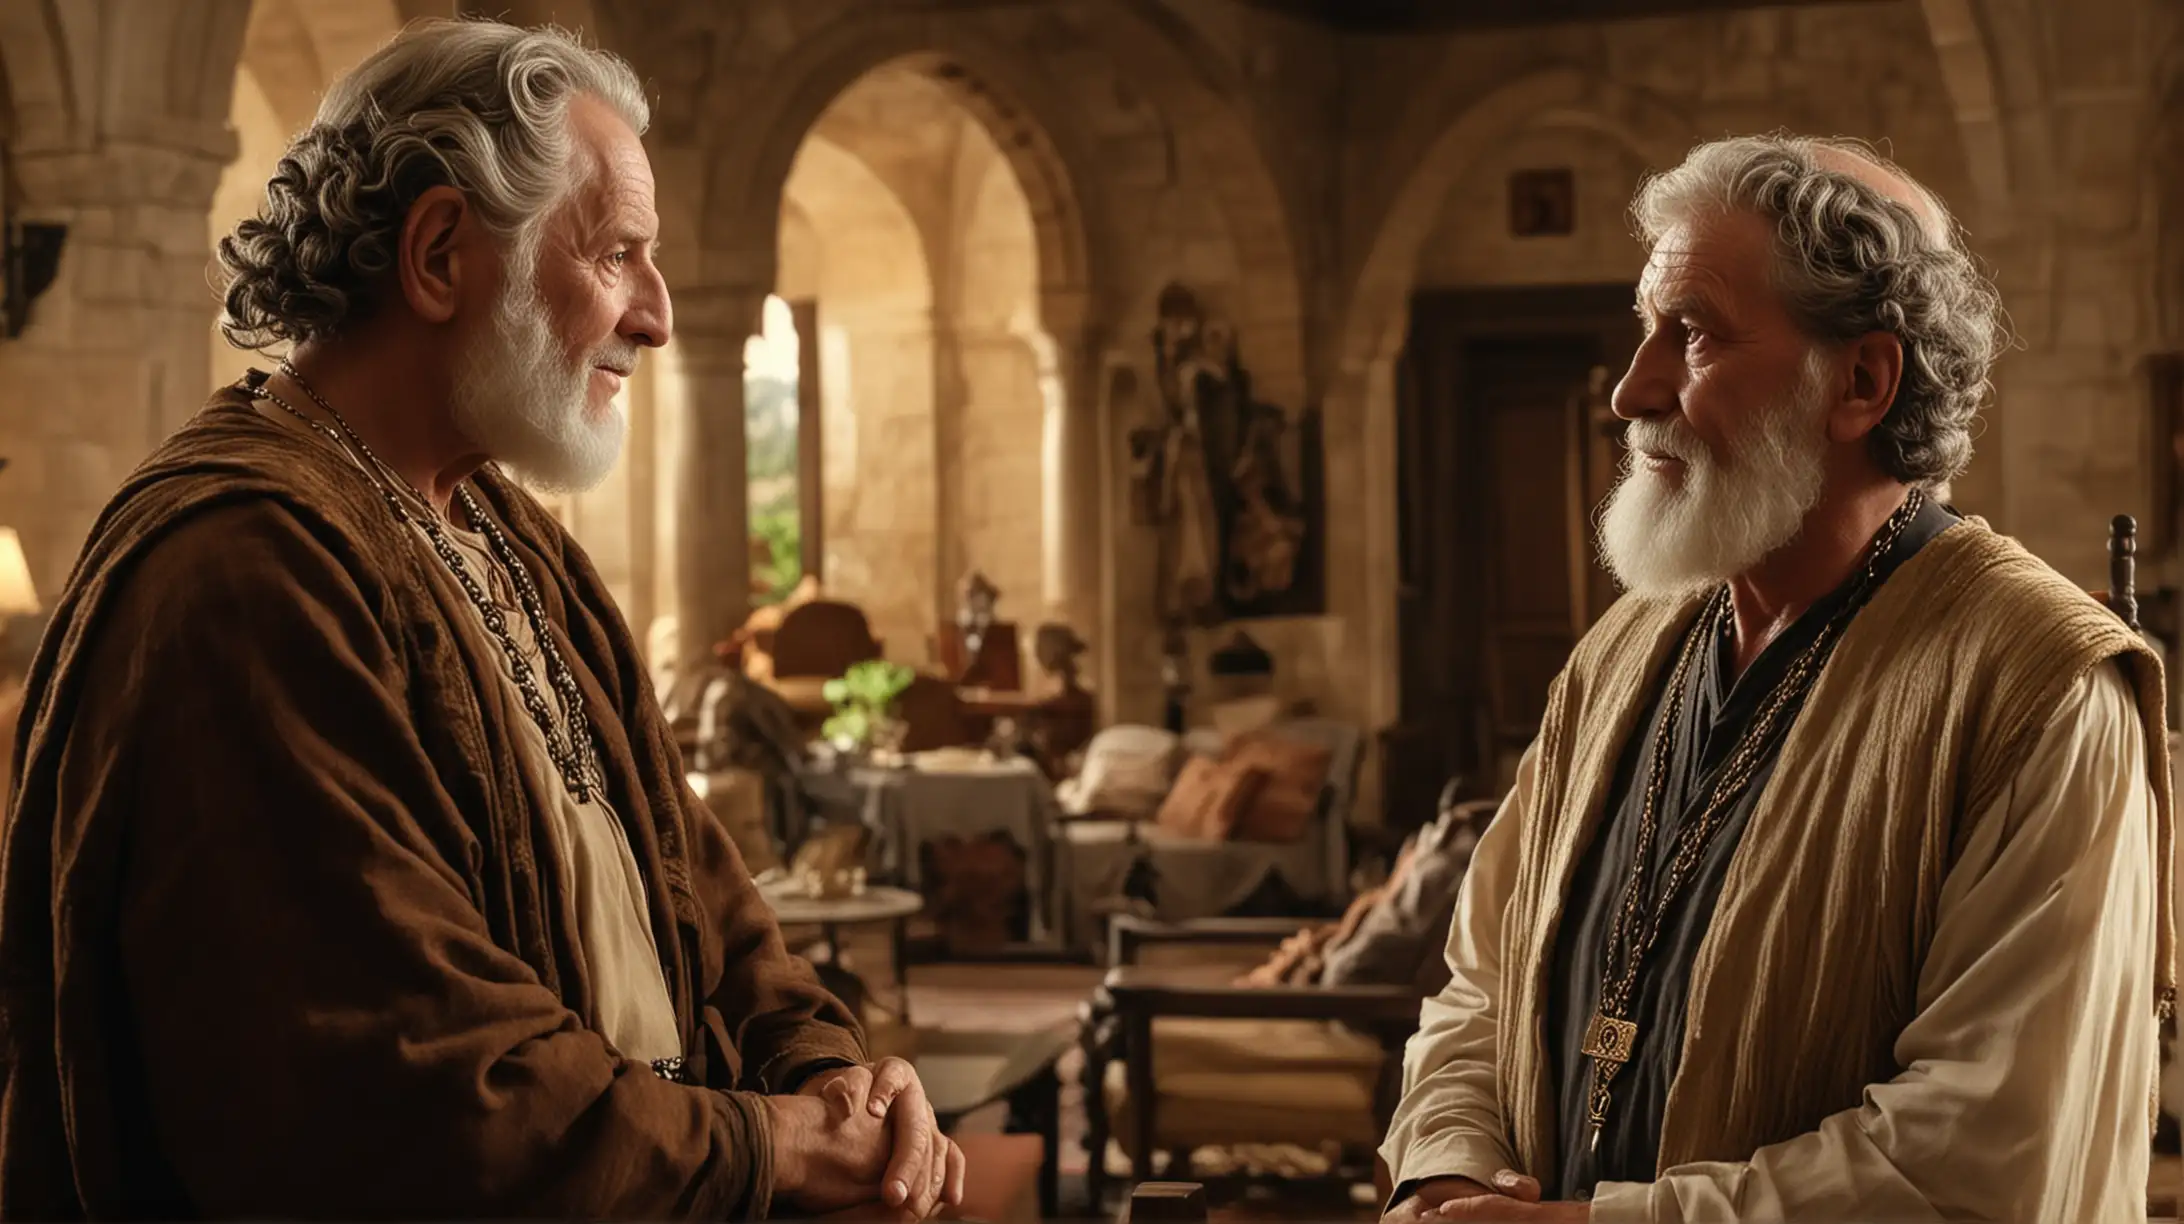 Elderly Noblemen Engage in Discourse within Opulent Palace during King Davids Reign